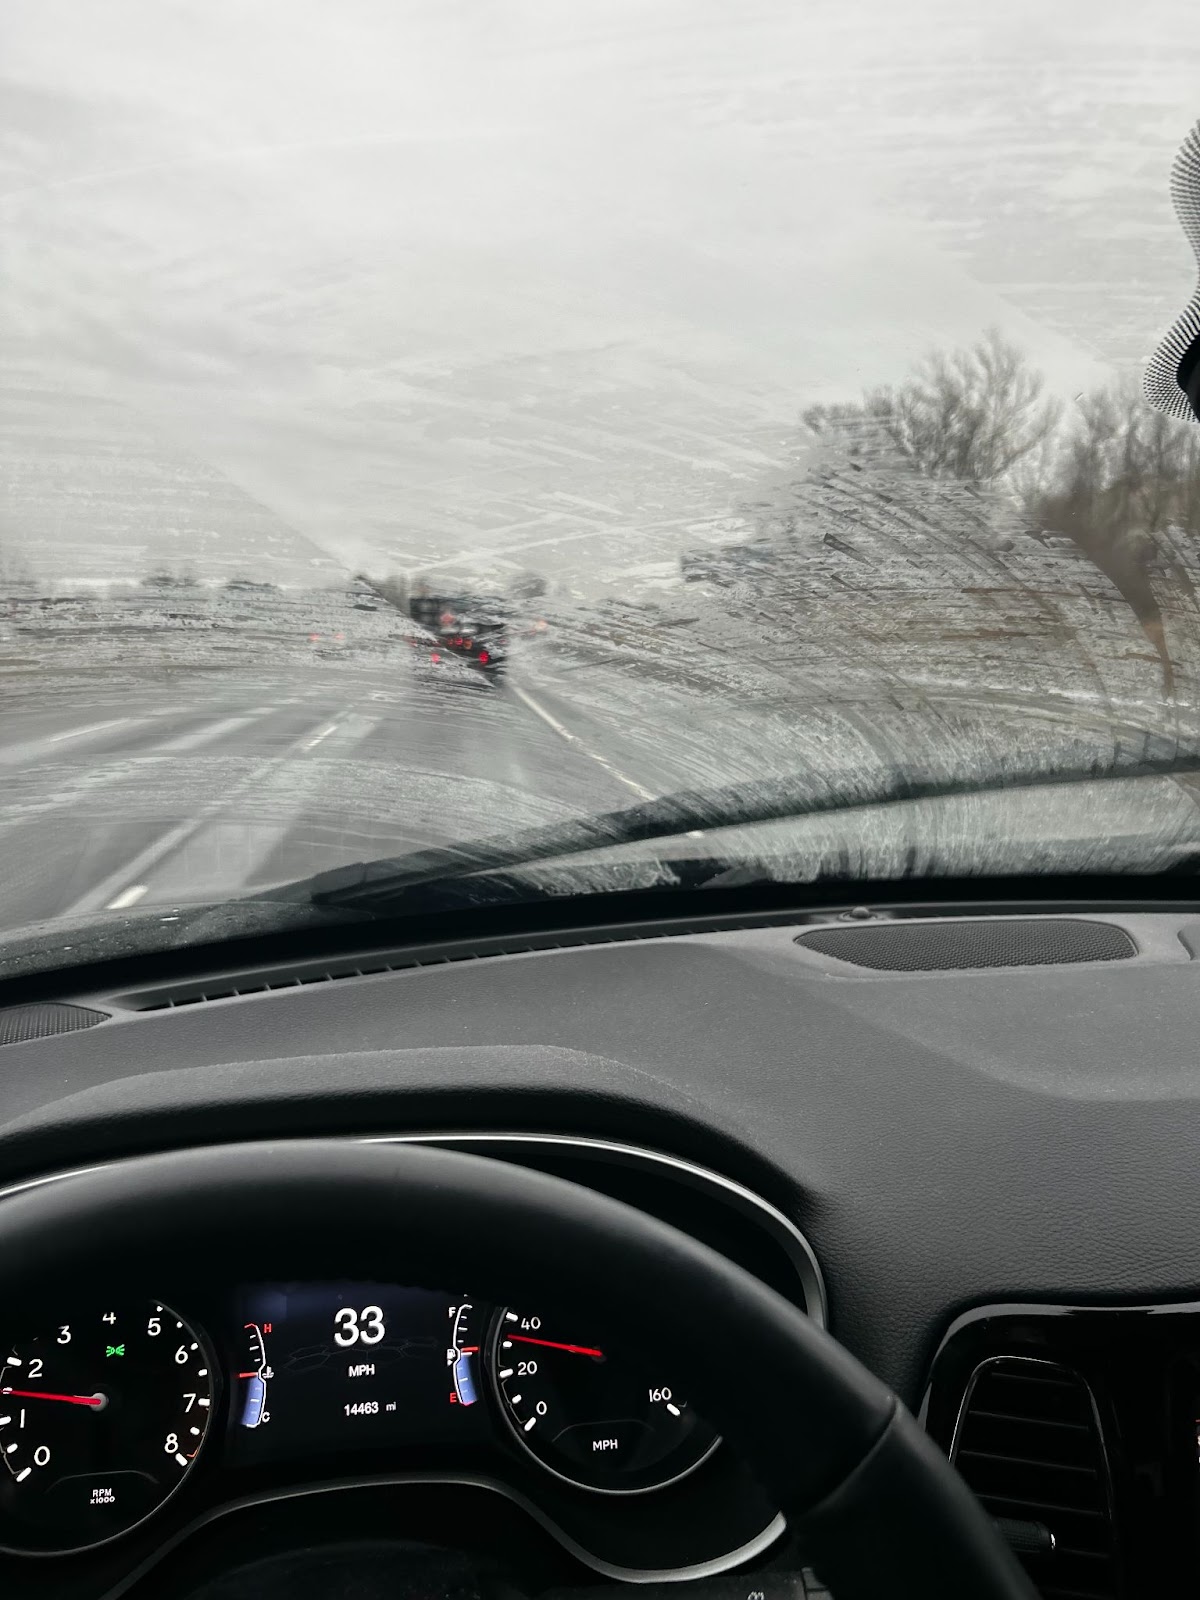 When Do I Need New Windshield Wipers?